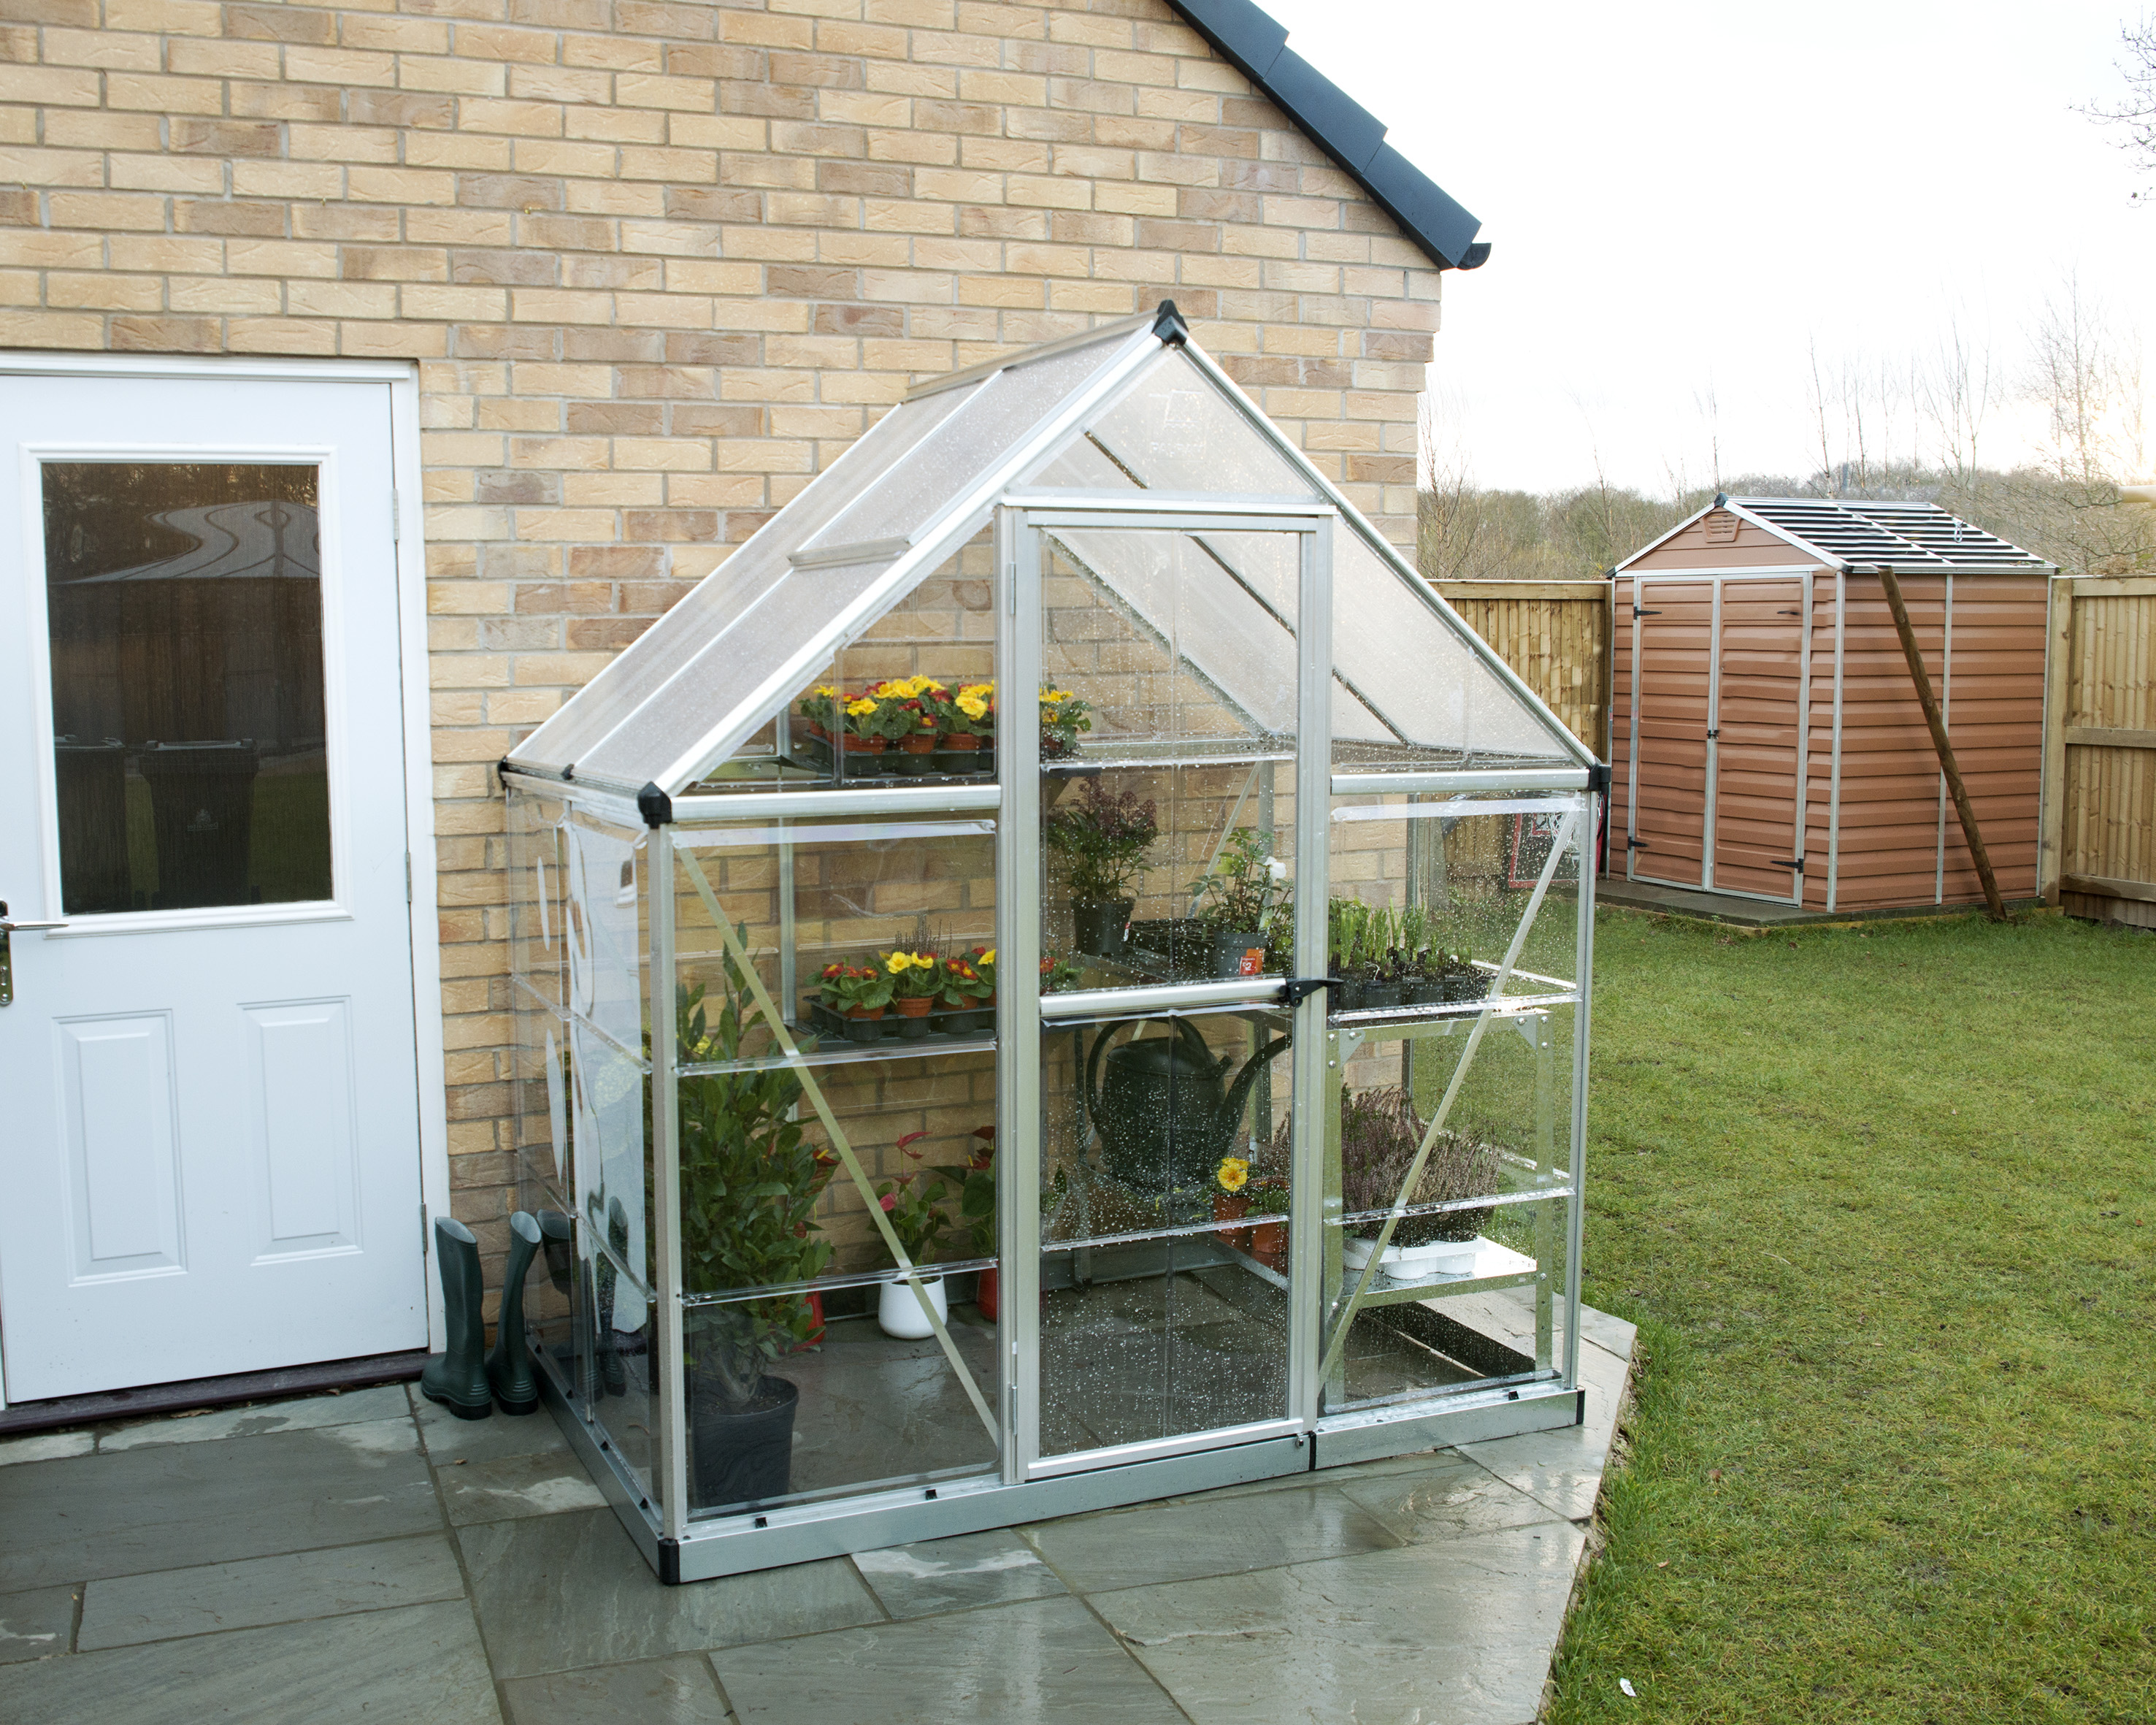 Palram - Canopia Hybrid 6' x 4' Polycarbonate/Aluminum Walk-In Greenhouse – Silver - with Roof Vent - image 3 of 12